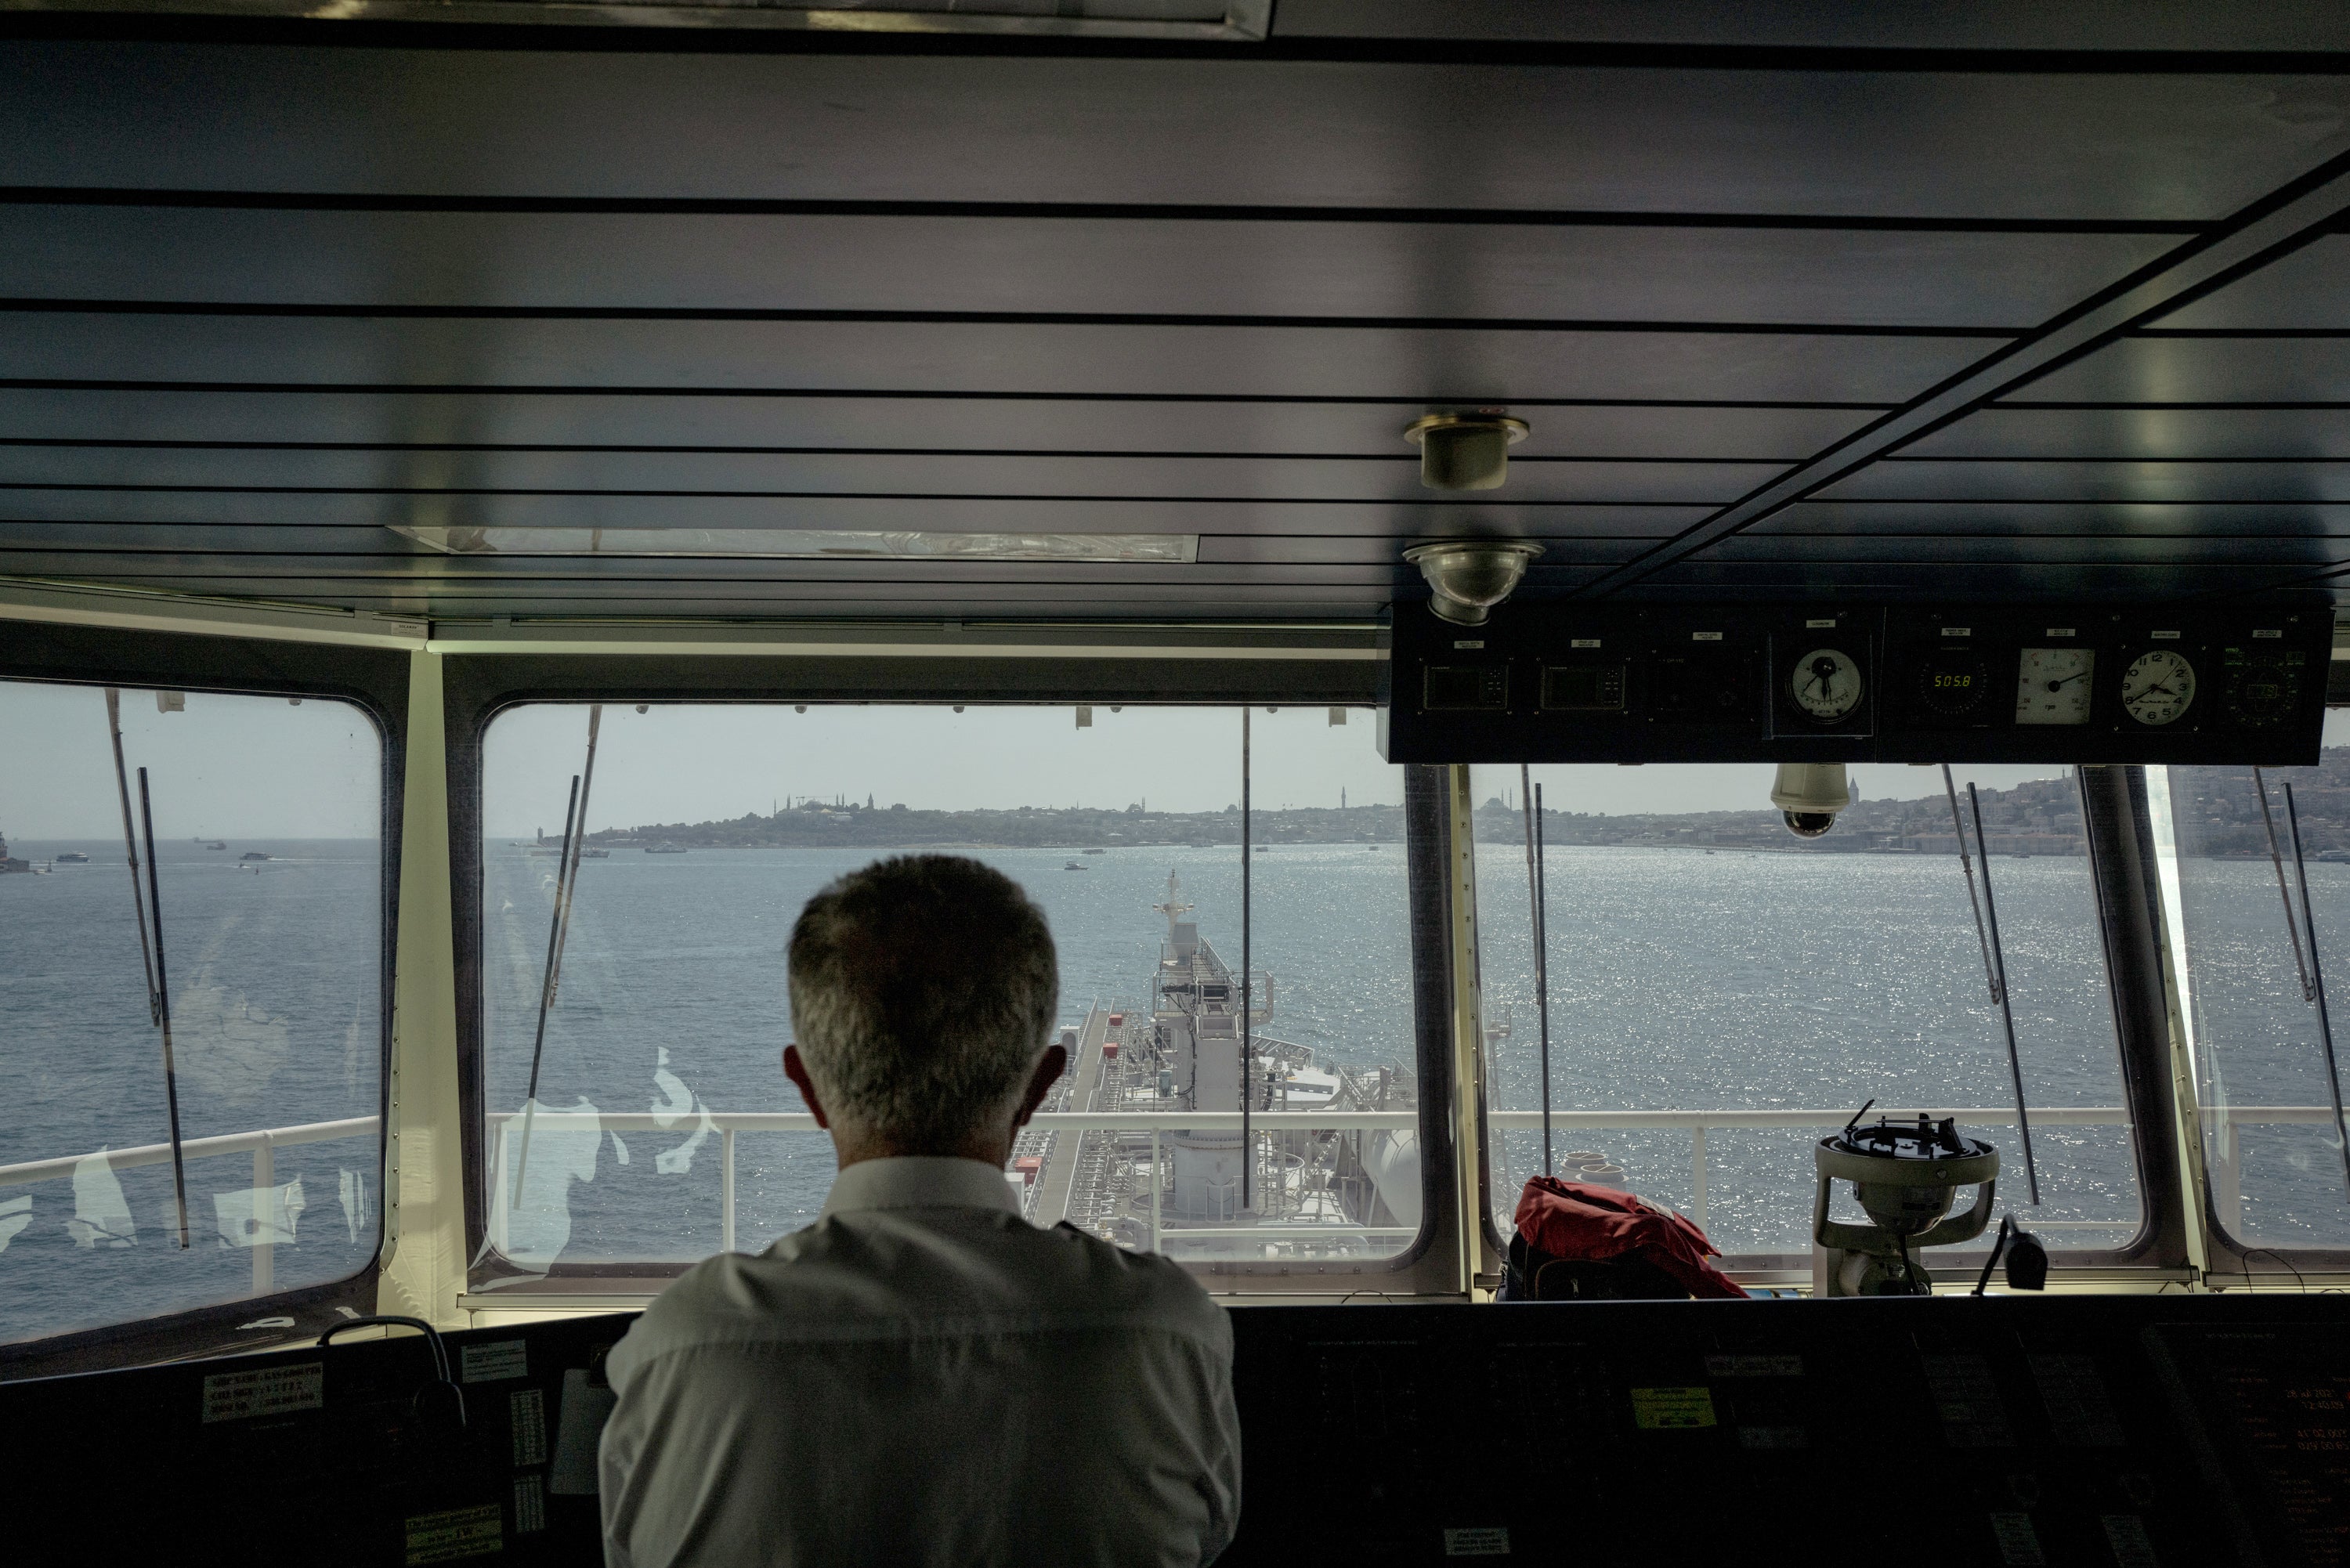 Many rivers to cross: Ismail Akpinar helps 3-4 ships navigate the Bosporus every day